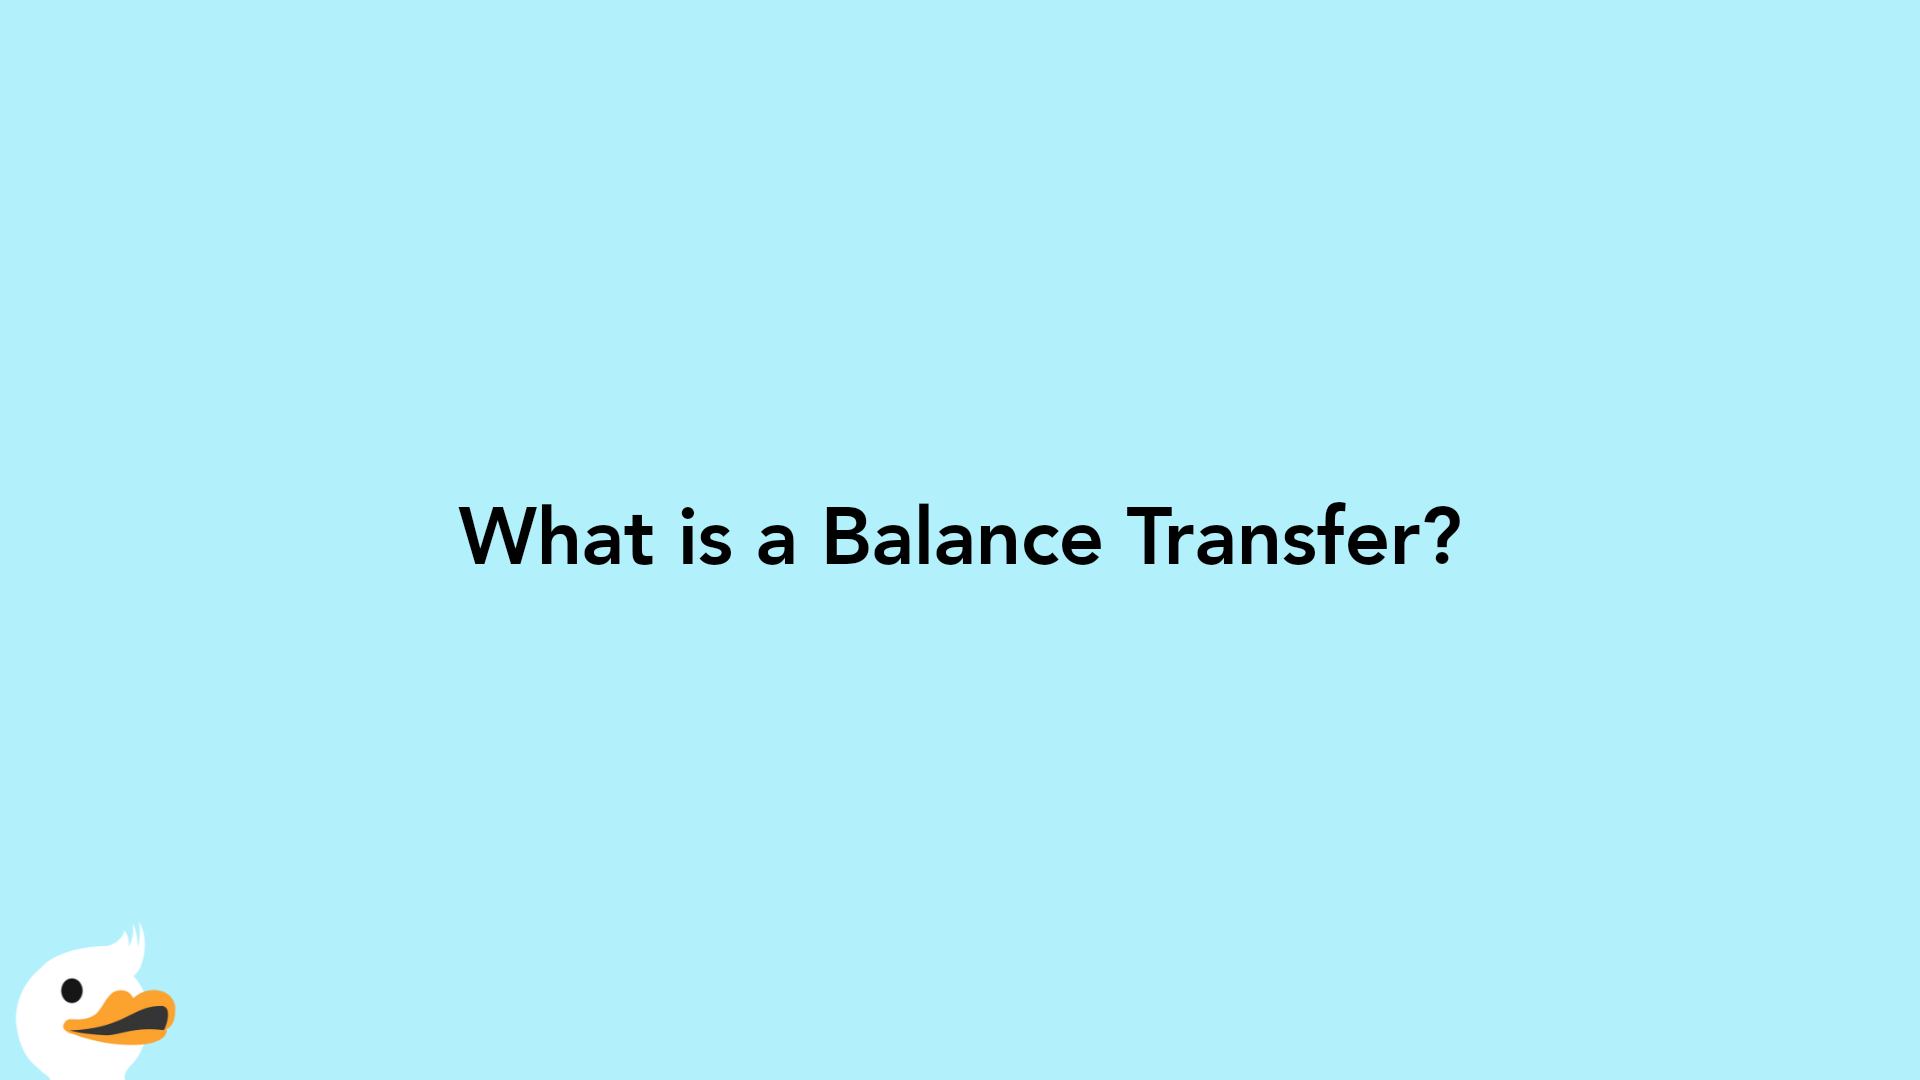 What is a Balance Transfer?